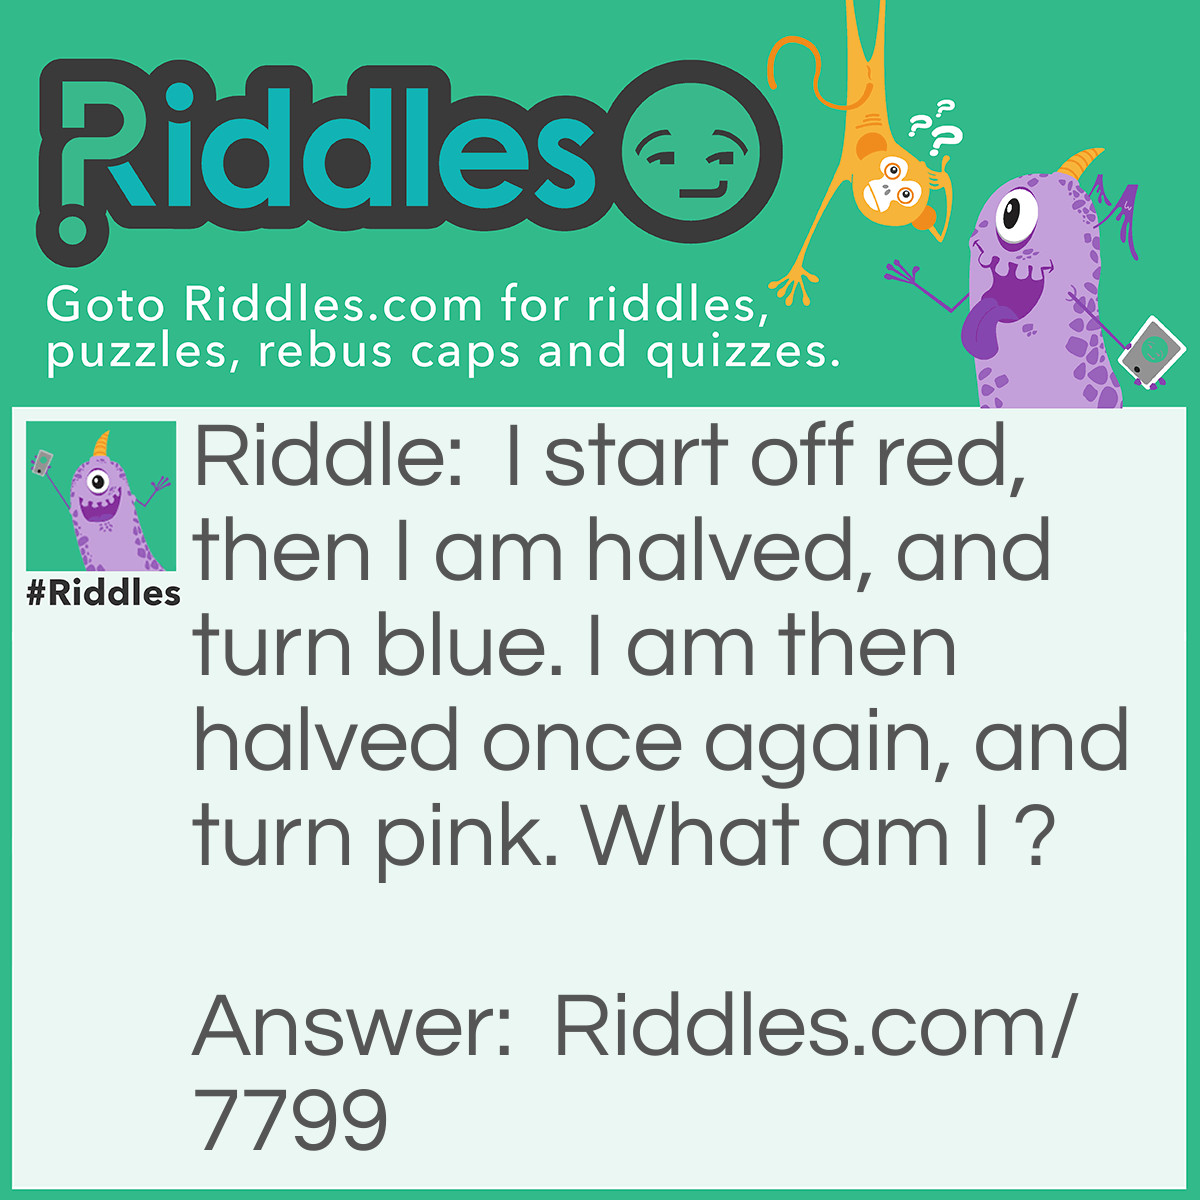 Riddle: I start off red, then I am halved, and turn blue. I am then halved once again, and turn pink. What am I ? Answer: Australian notes (money) $20 note is red $10 note is blue And a $5 note is pink!